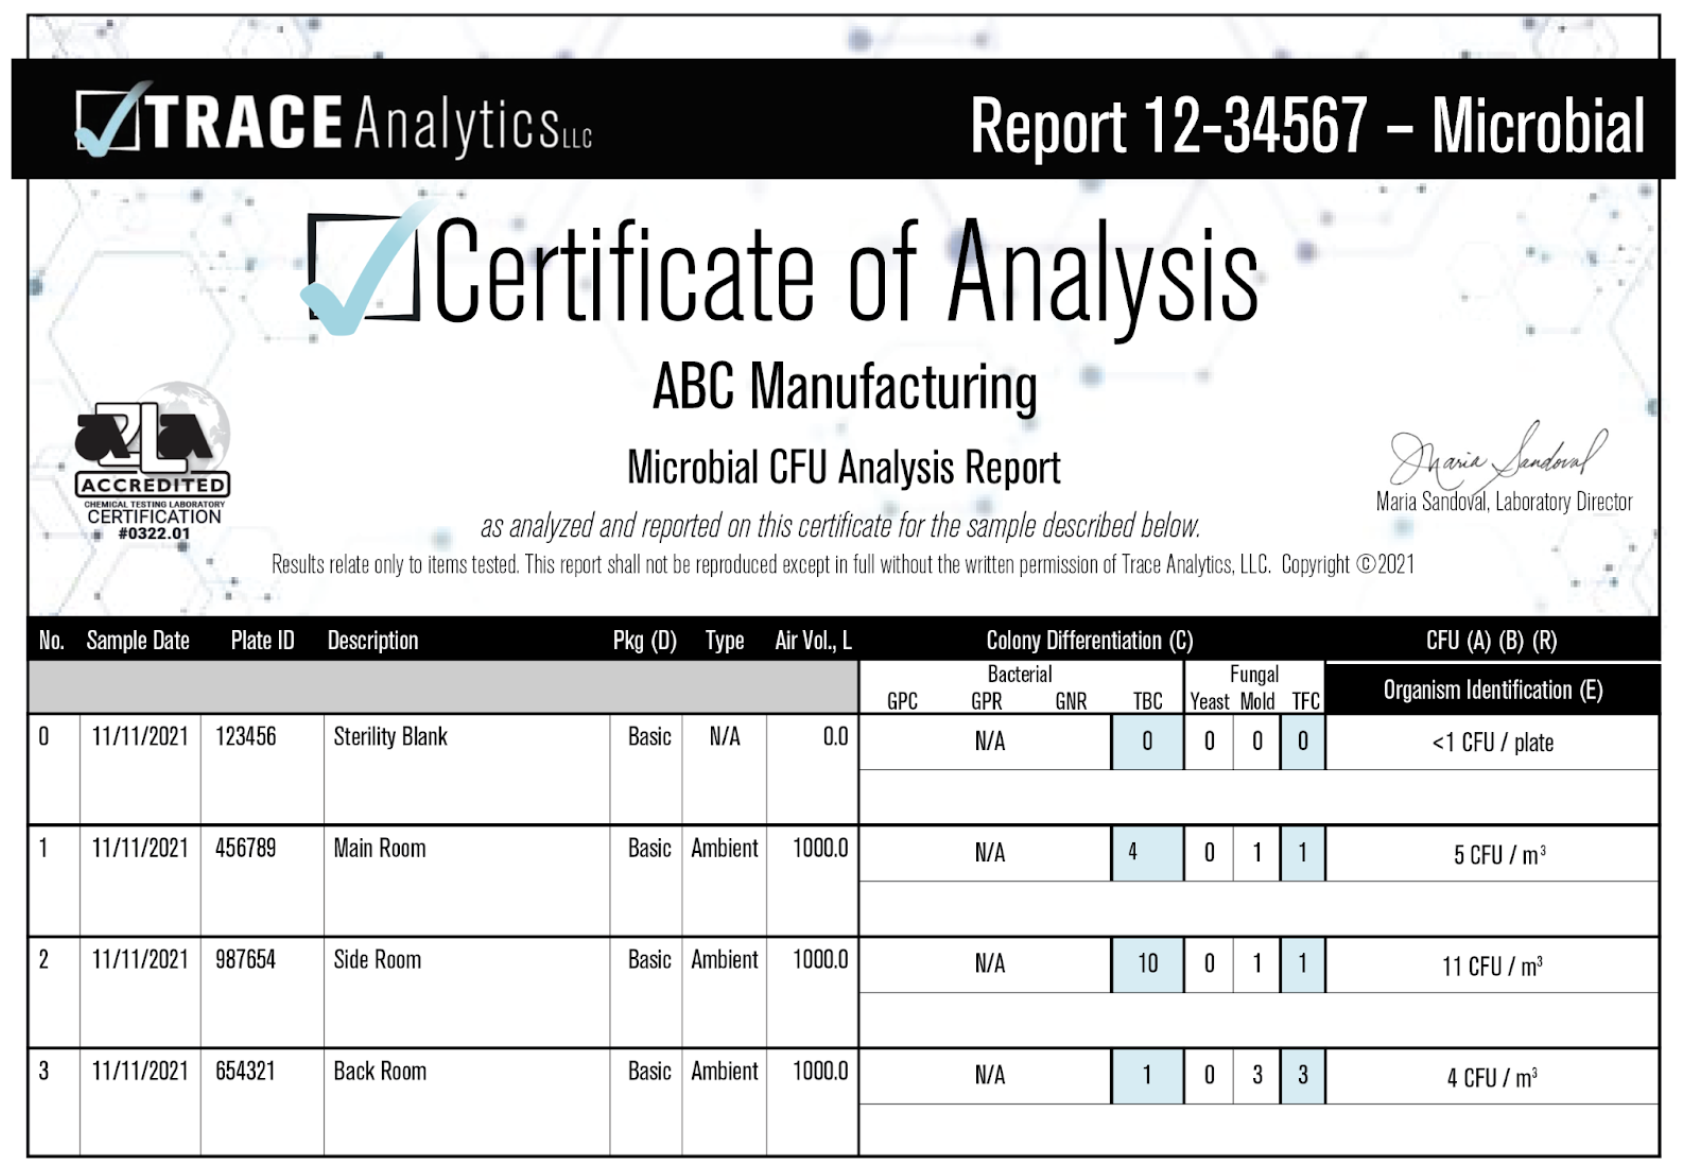 AirCheck Report for Microorganisms at Trace Analytics